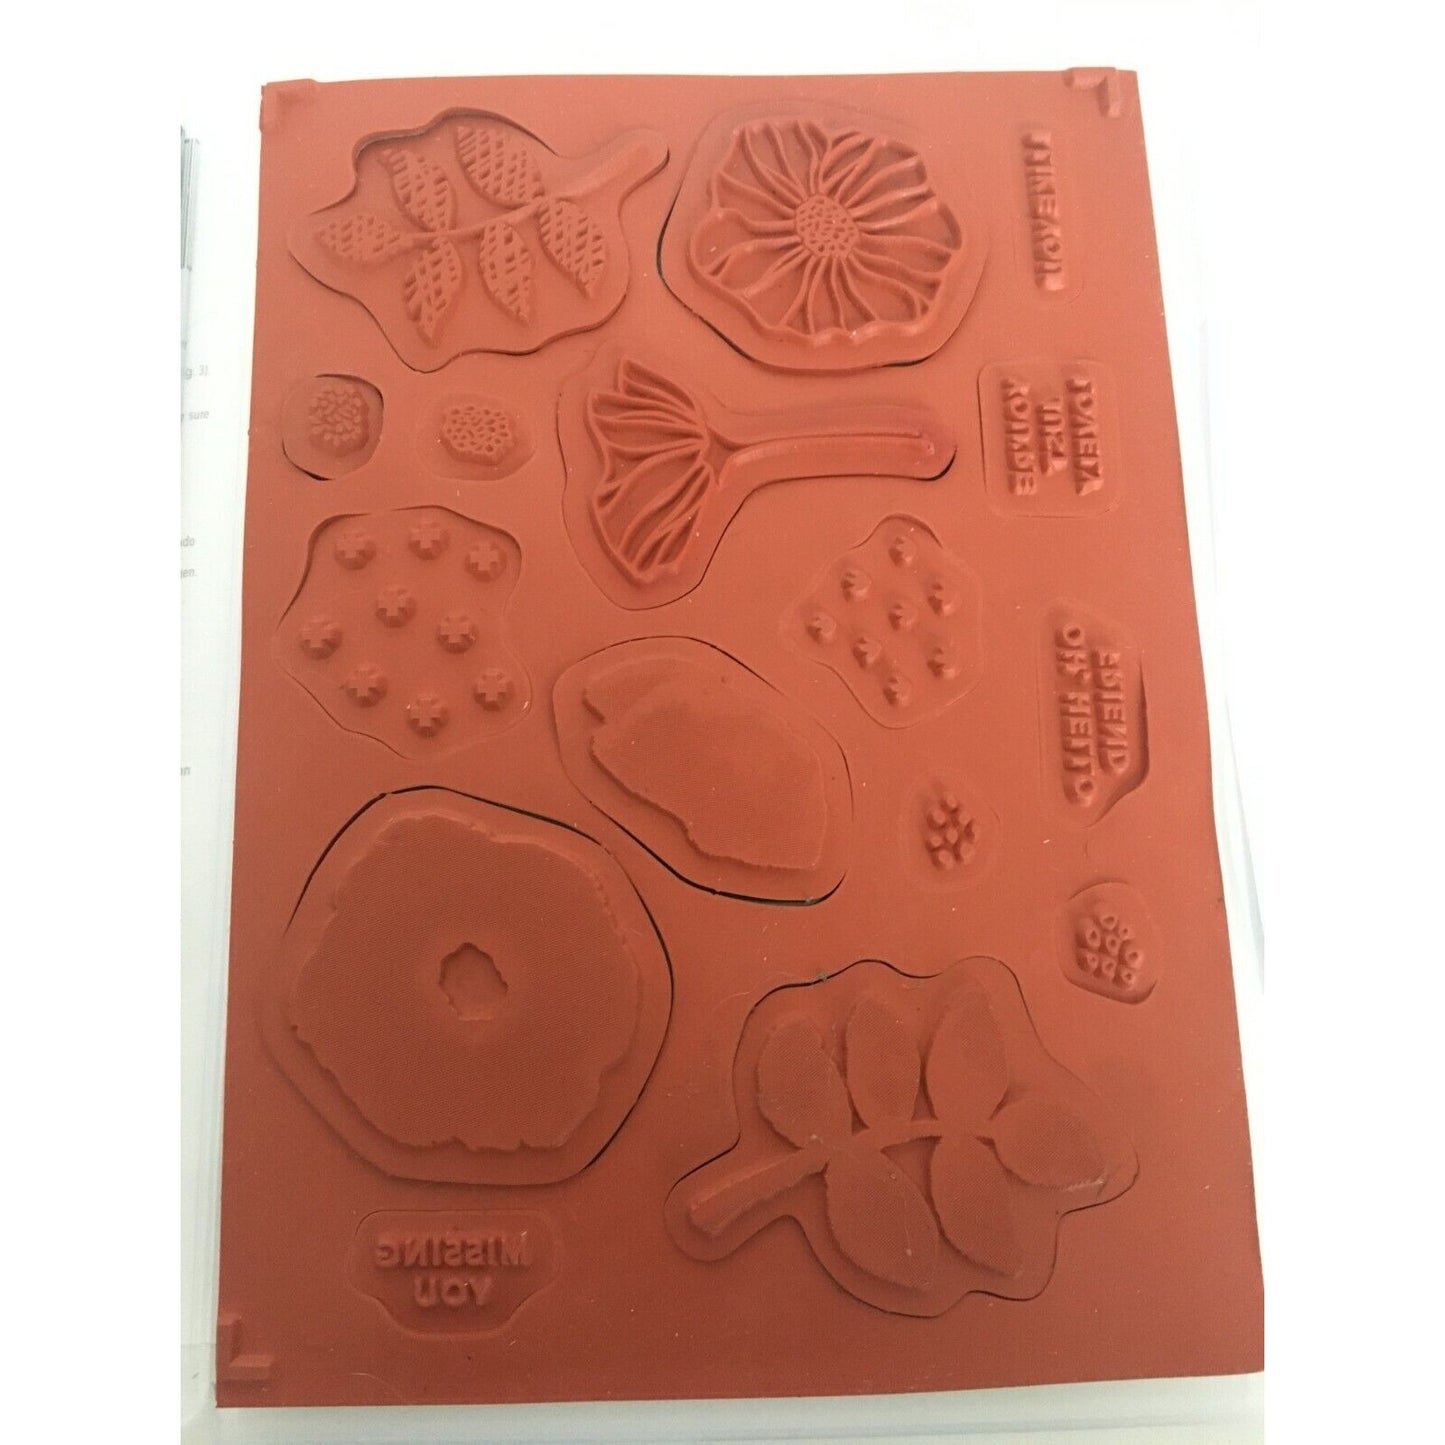 Stampin Up Oh So Eclectic Stamp Set Eclectic Layers Thinlits Dies Flower Leaf 16